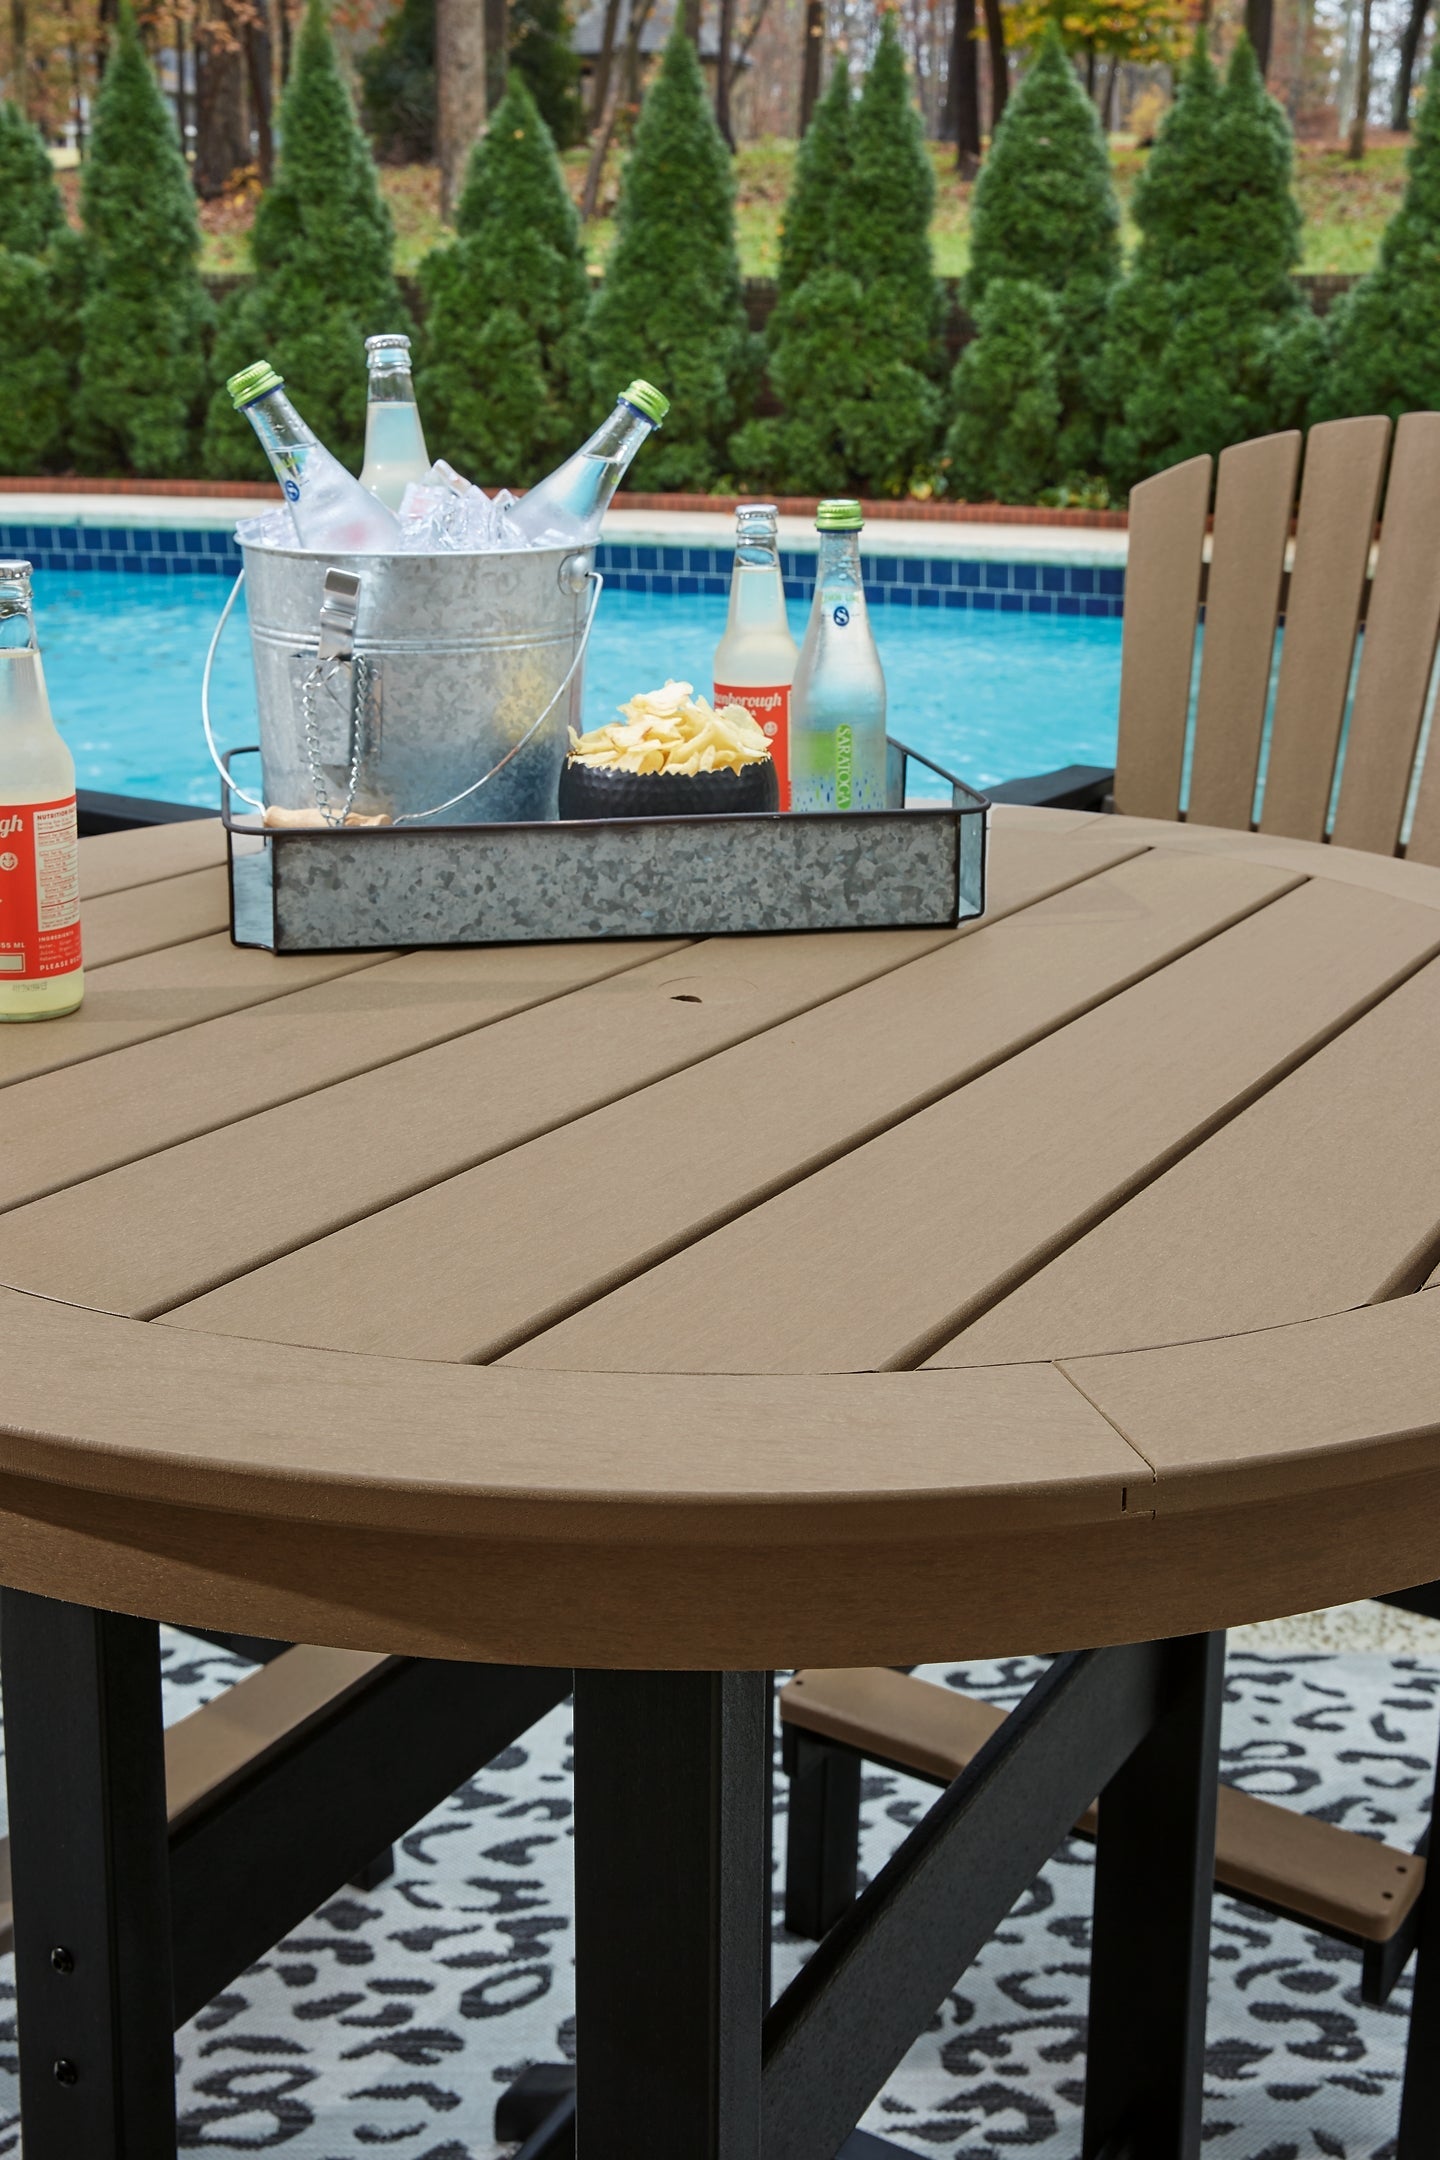 Fairen Trail Outdoor Bar Table and 2 Barstools at Cloud 9 Mattress & Furniture furniture, home furnishing, home decor